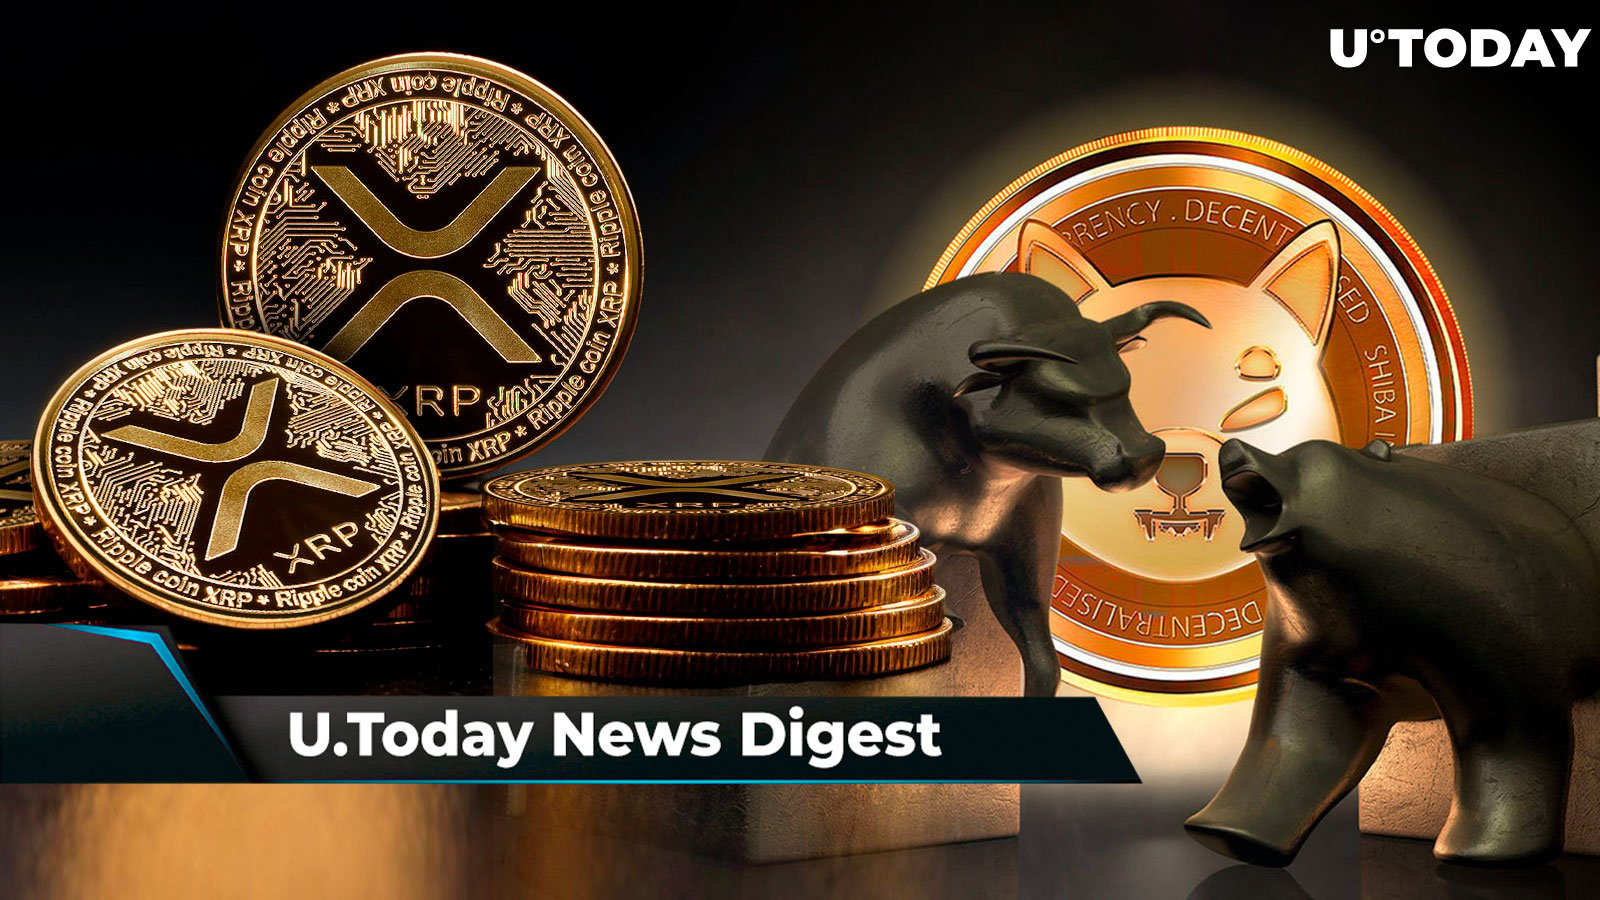 XRP Attracts $1.2 Million Inflow, 40 Trillion SHIB in Spotlight As Bulls and Bears Clash, Cardano Dominating Social Media Discussions: Crypto News Digest by U.Today